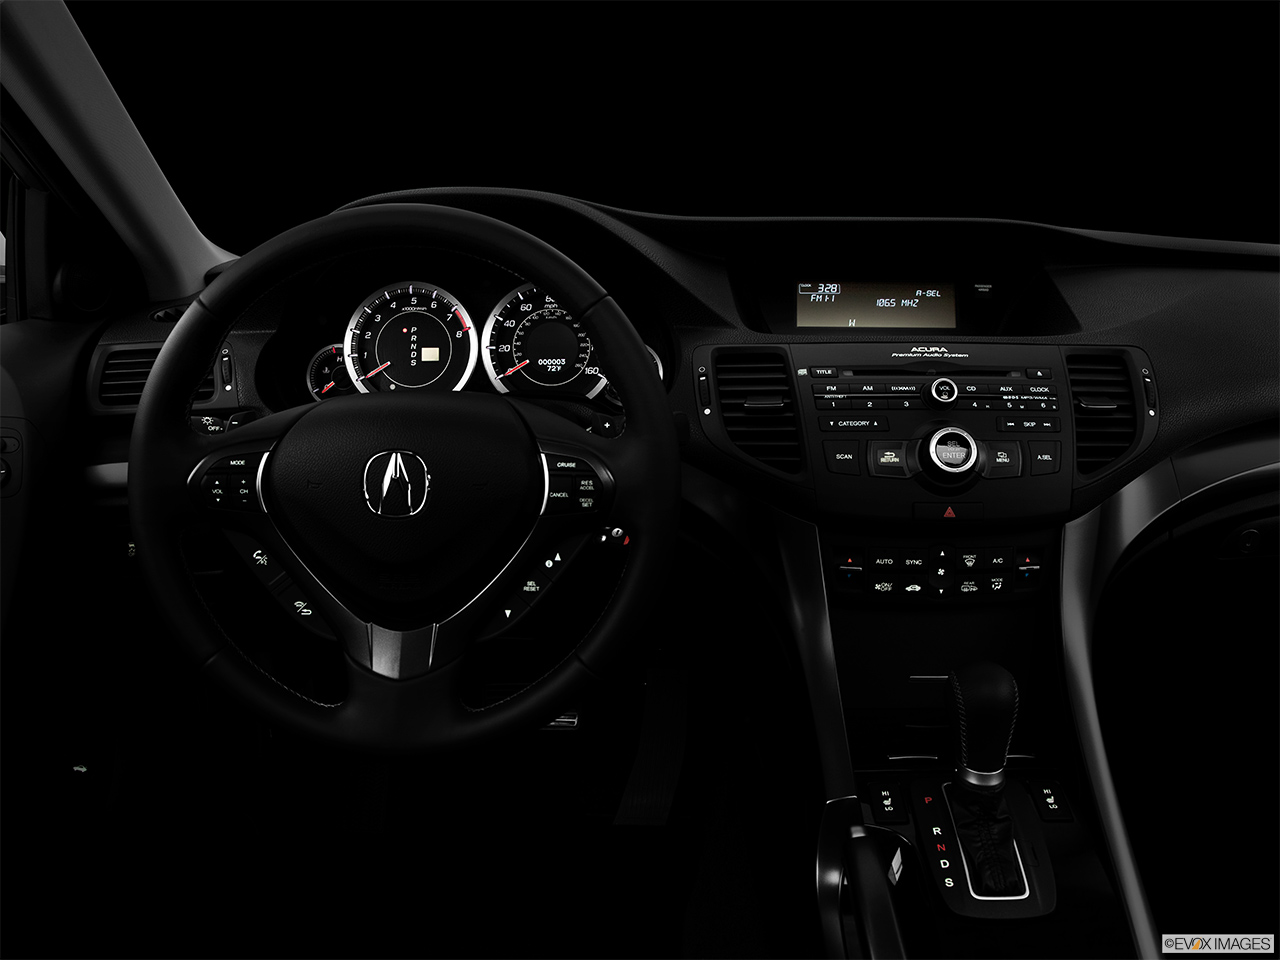 2013 Acura TSX 5-speed Automatic Centered wide dash shot - "night" shot. 